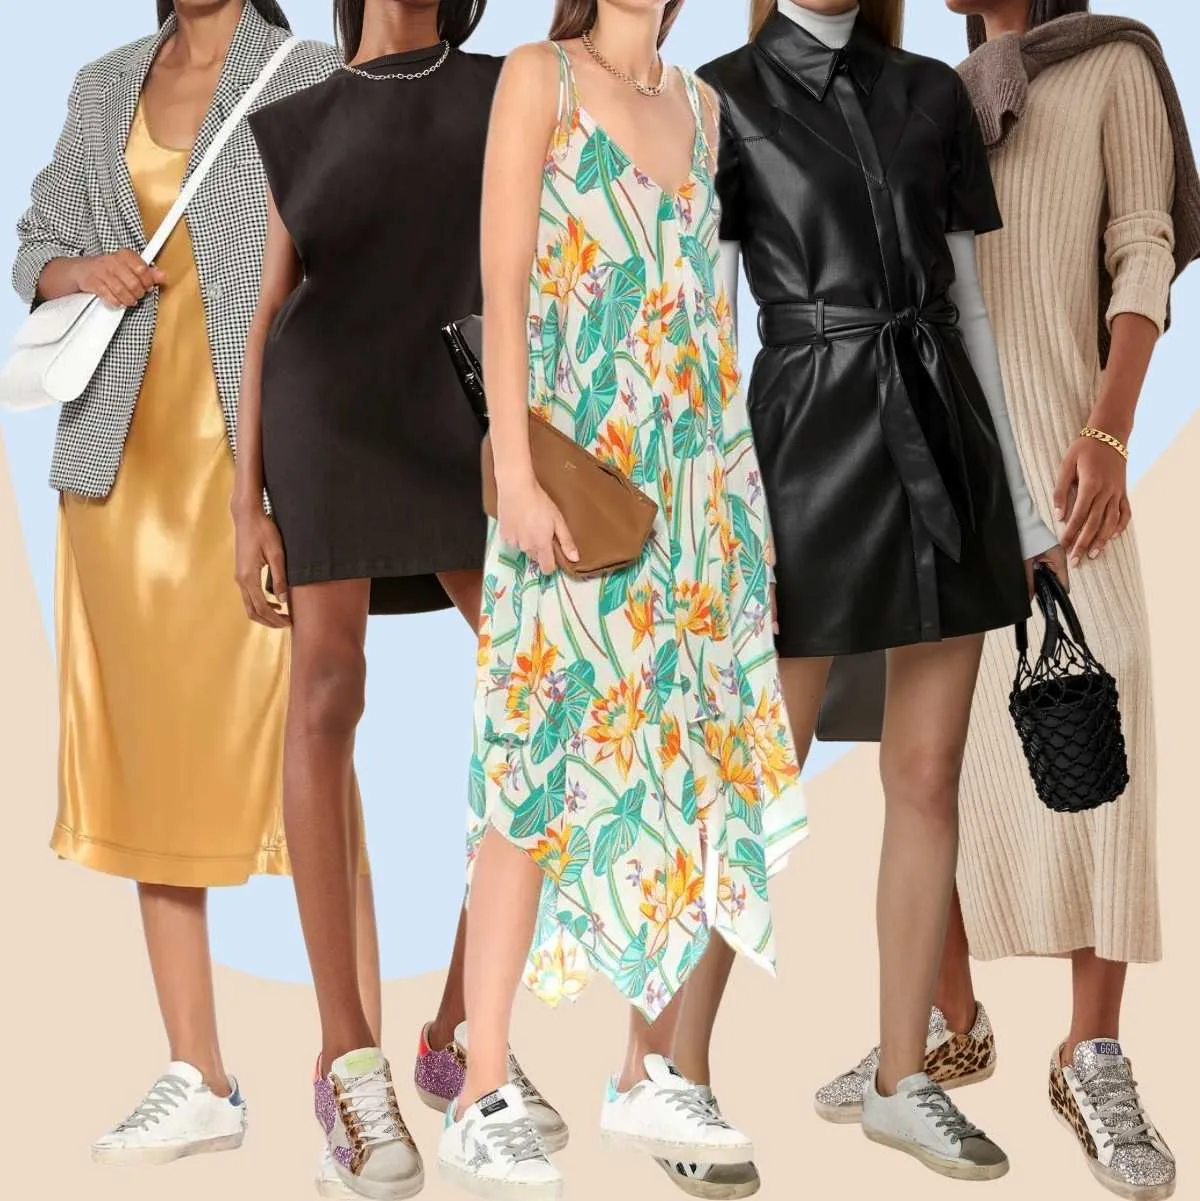 Collage of 5 women wearing different golden goose outfits with dresses.